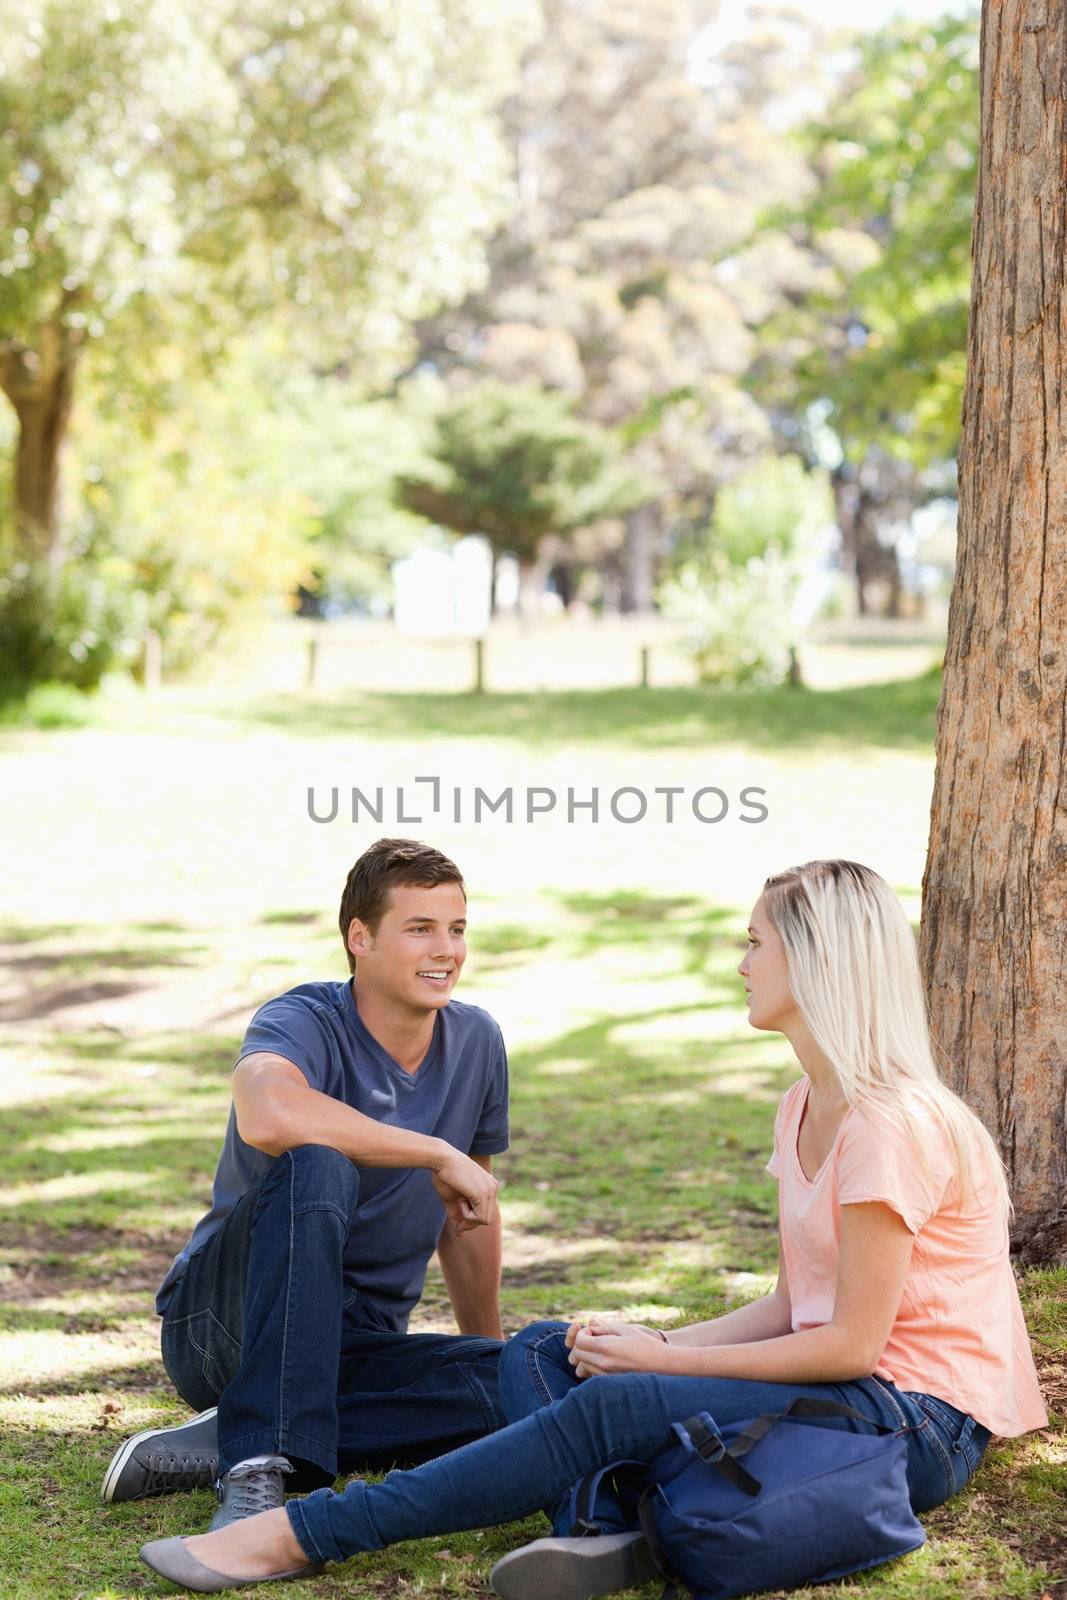 Students flirting in a park